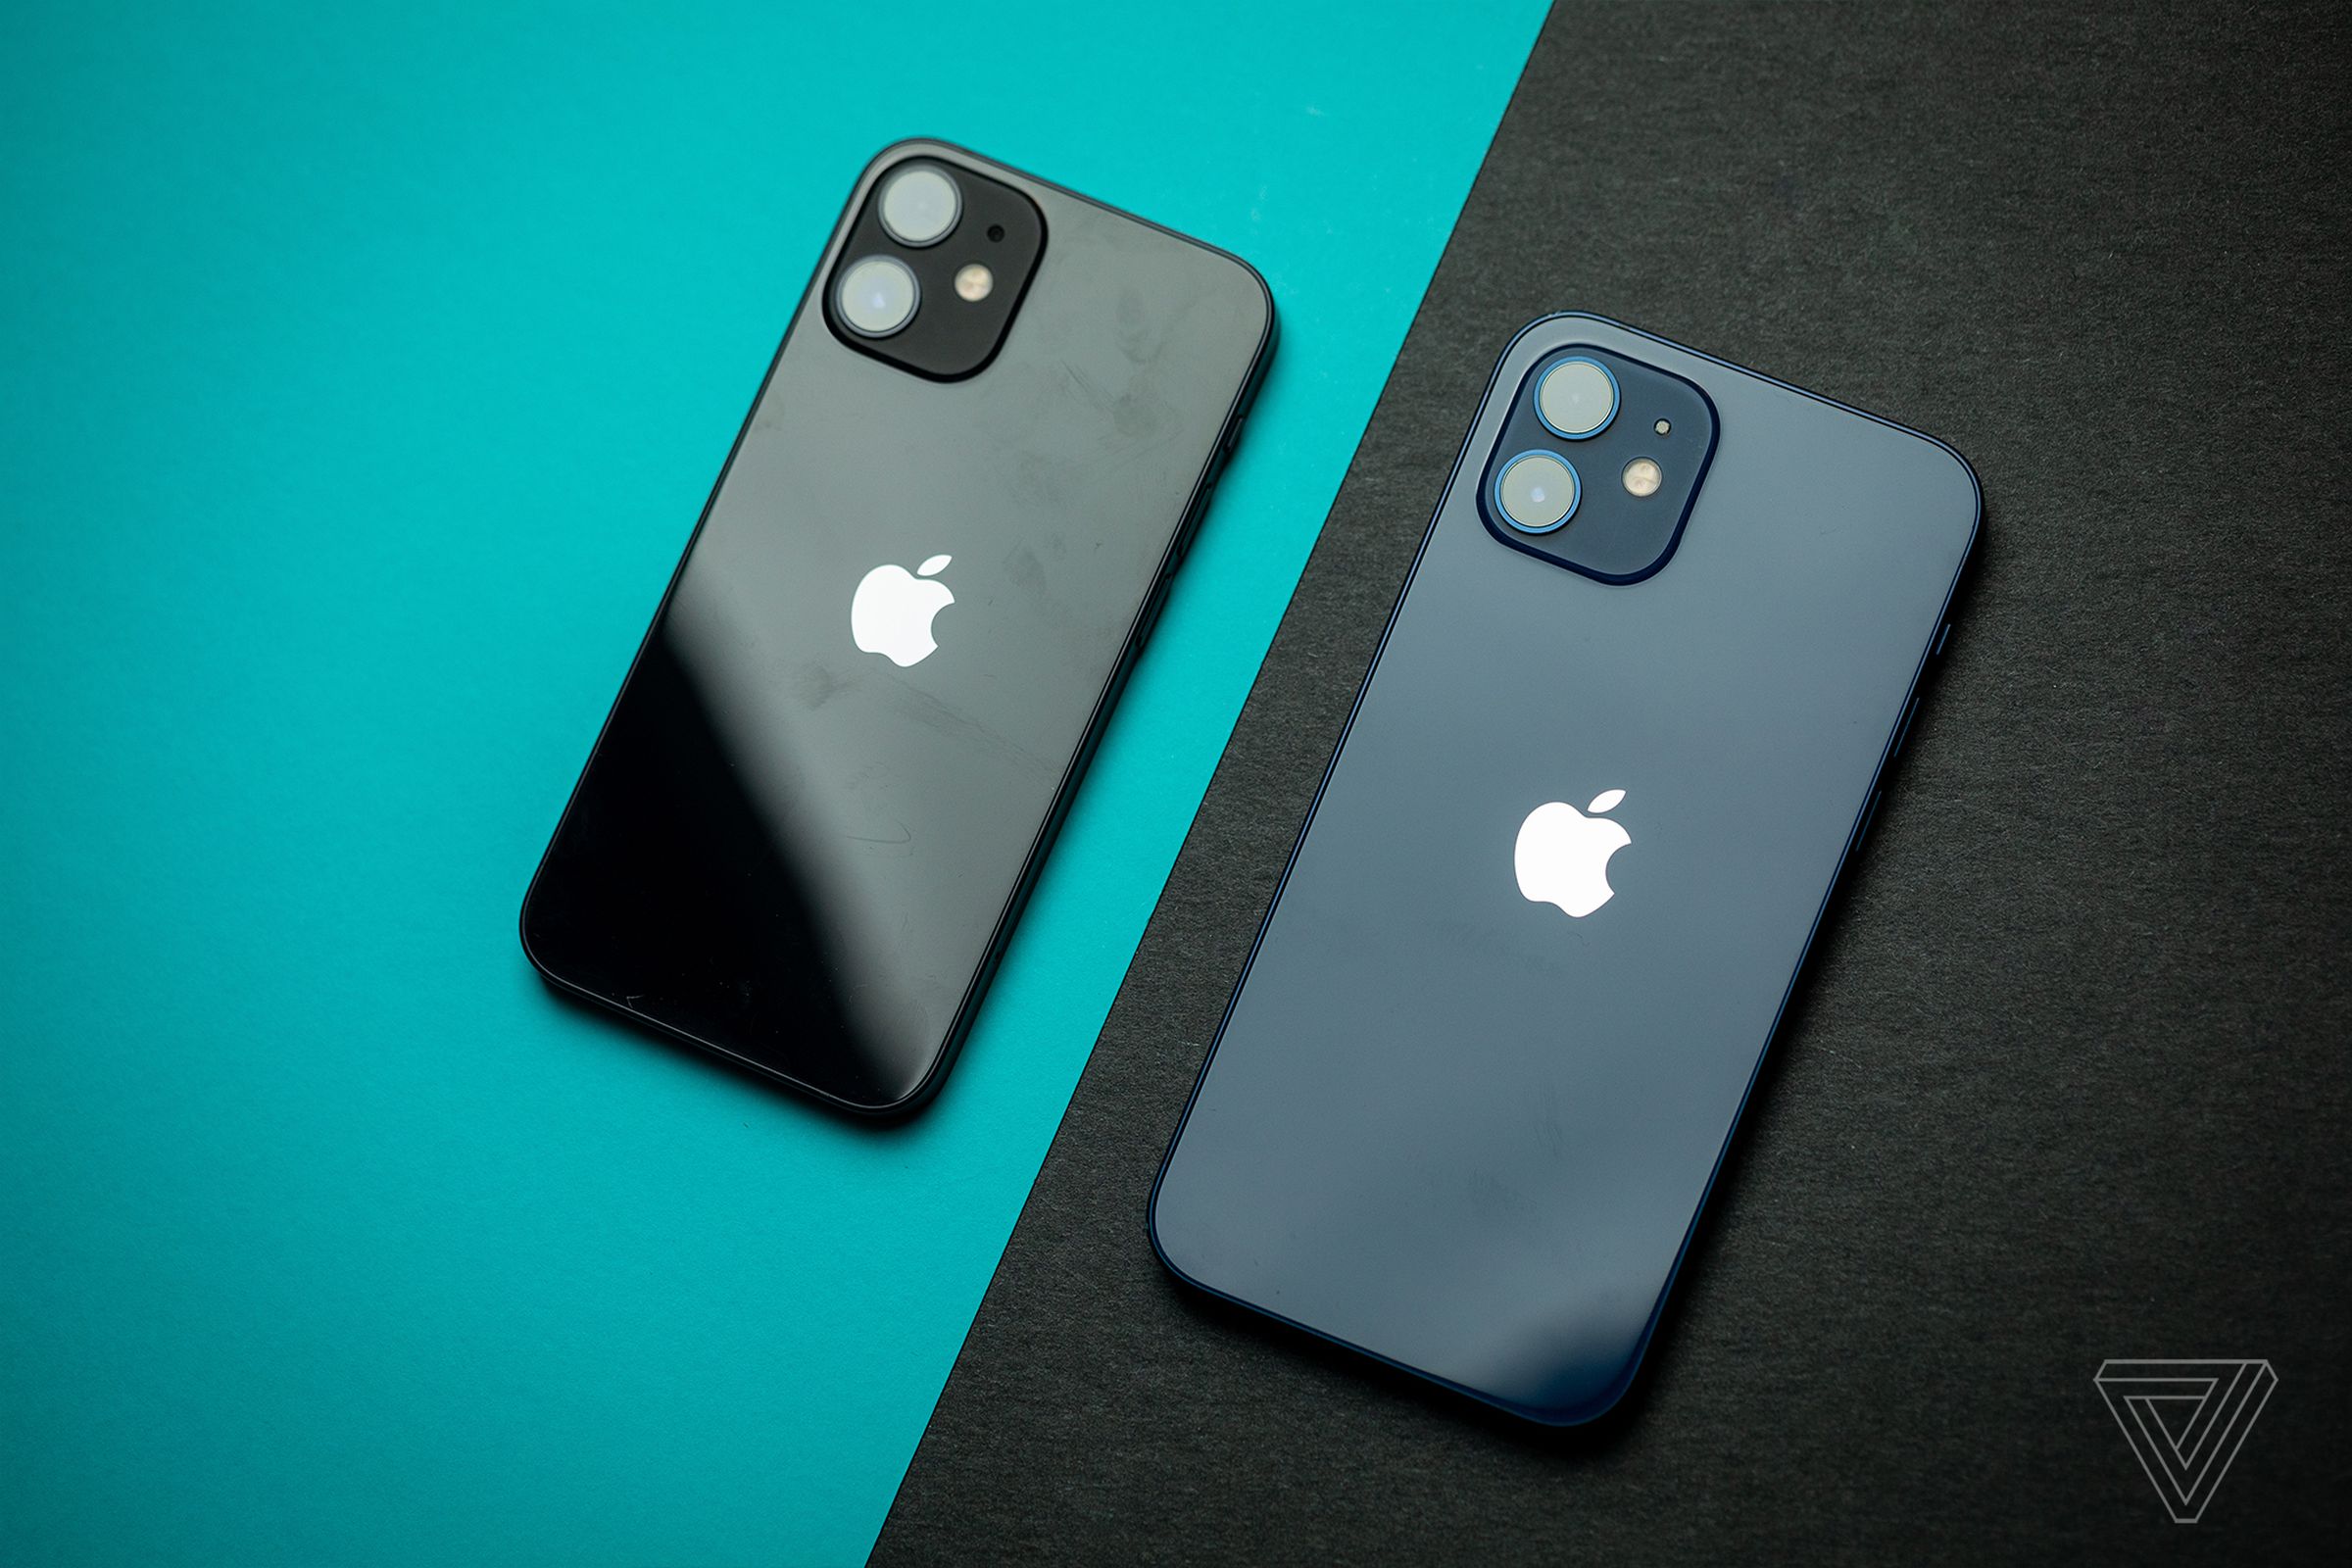 iPhone 12 mini (left) and iPhone 12 (right)